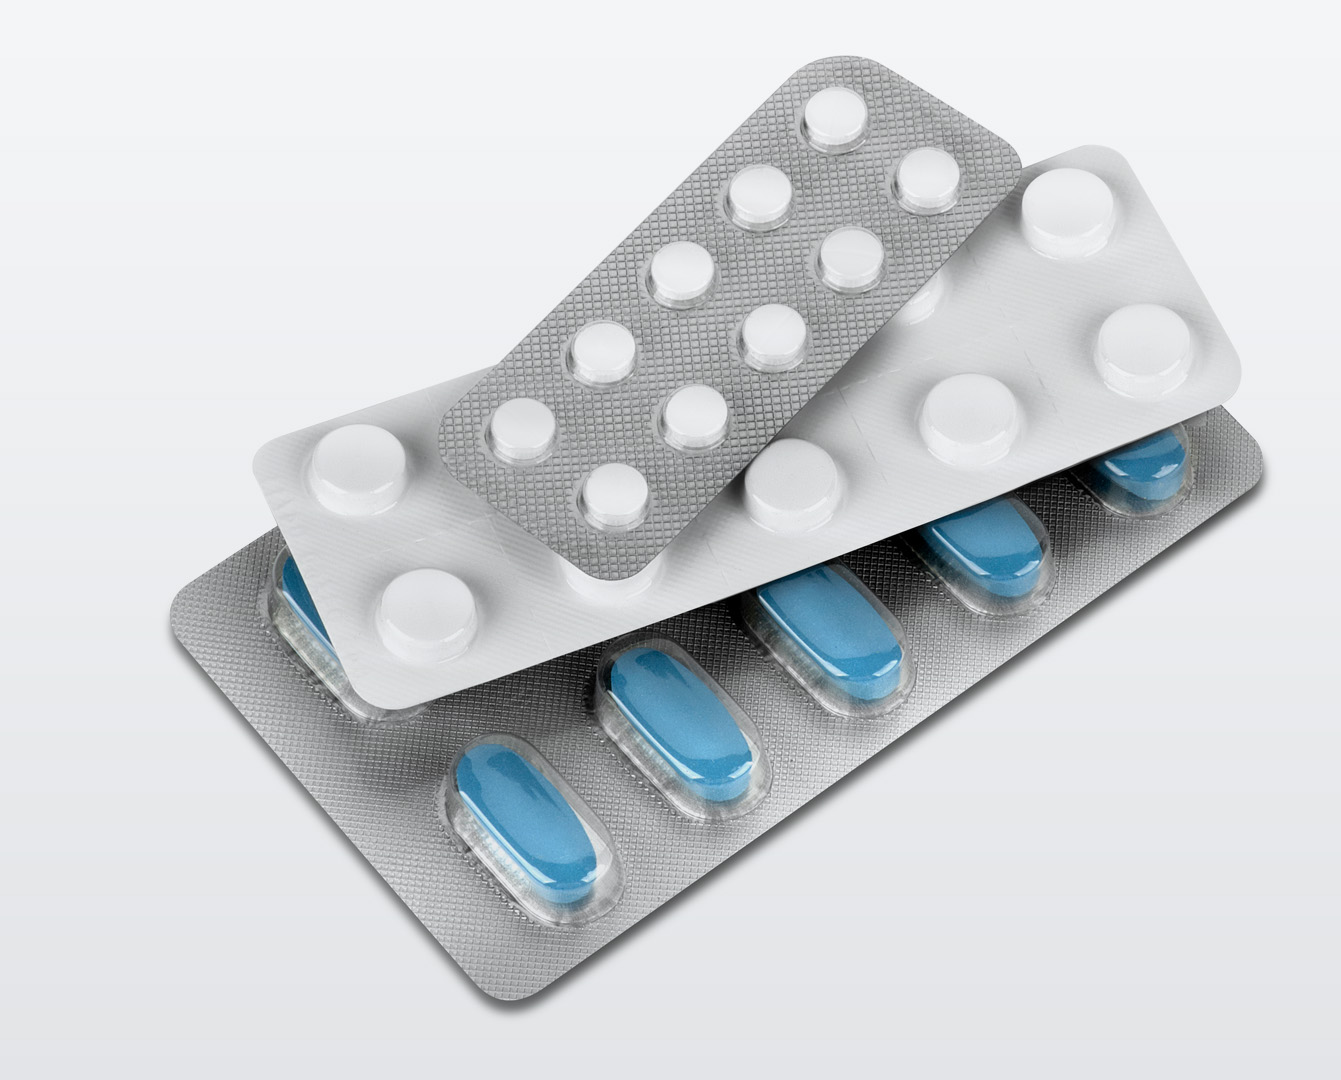 Blister packaging filled with pills.